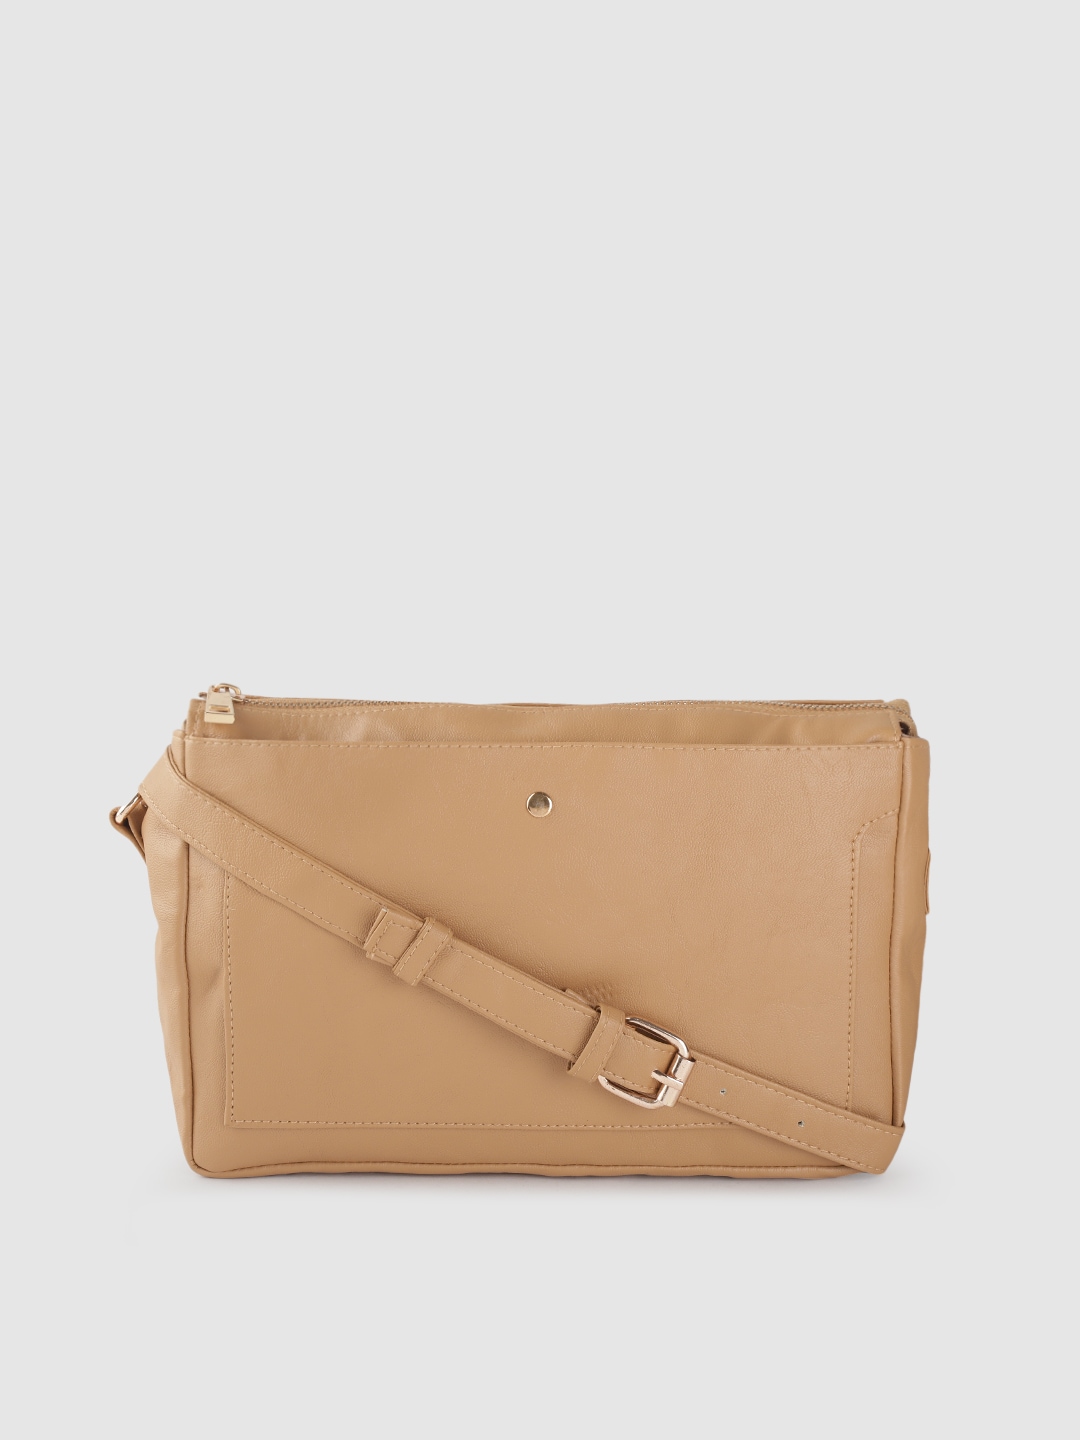 Mast & Harbour Beige Solid Structured Sling Bag Price in India